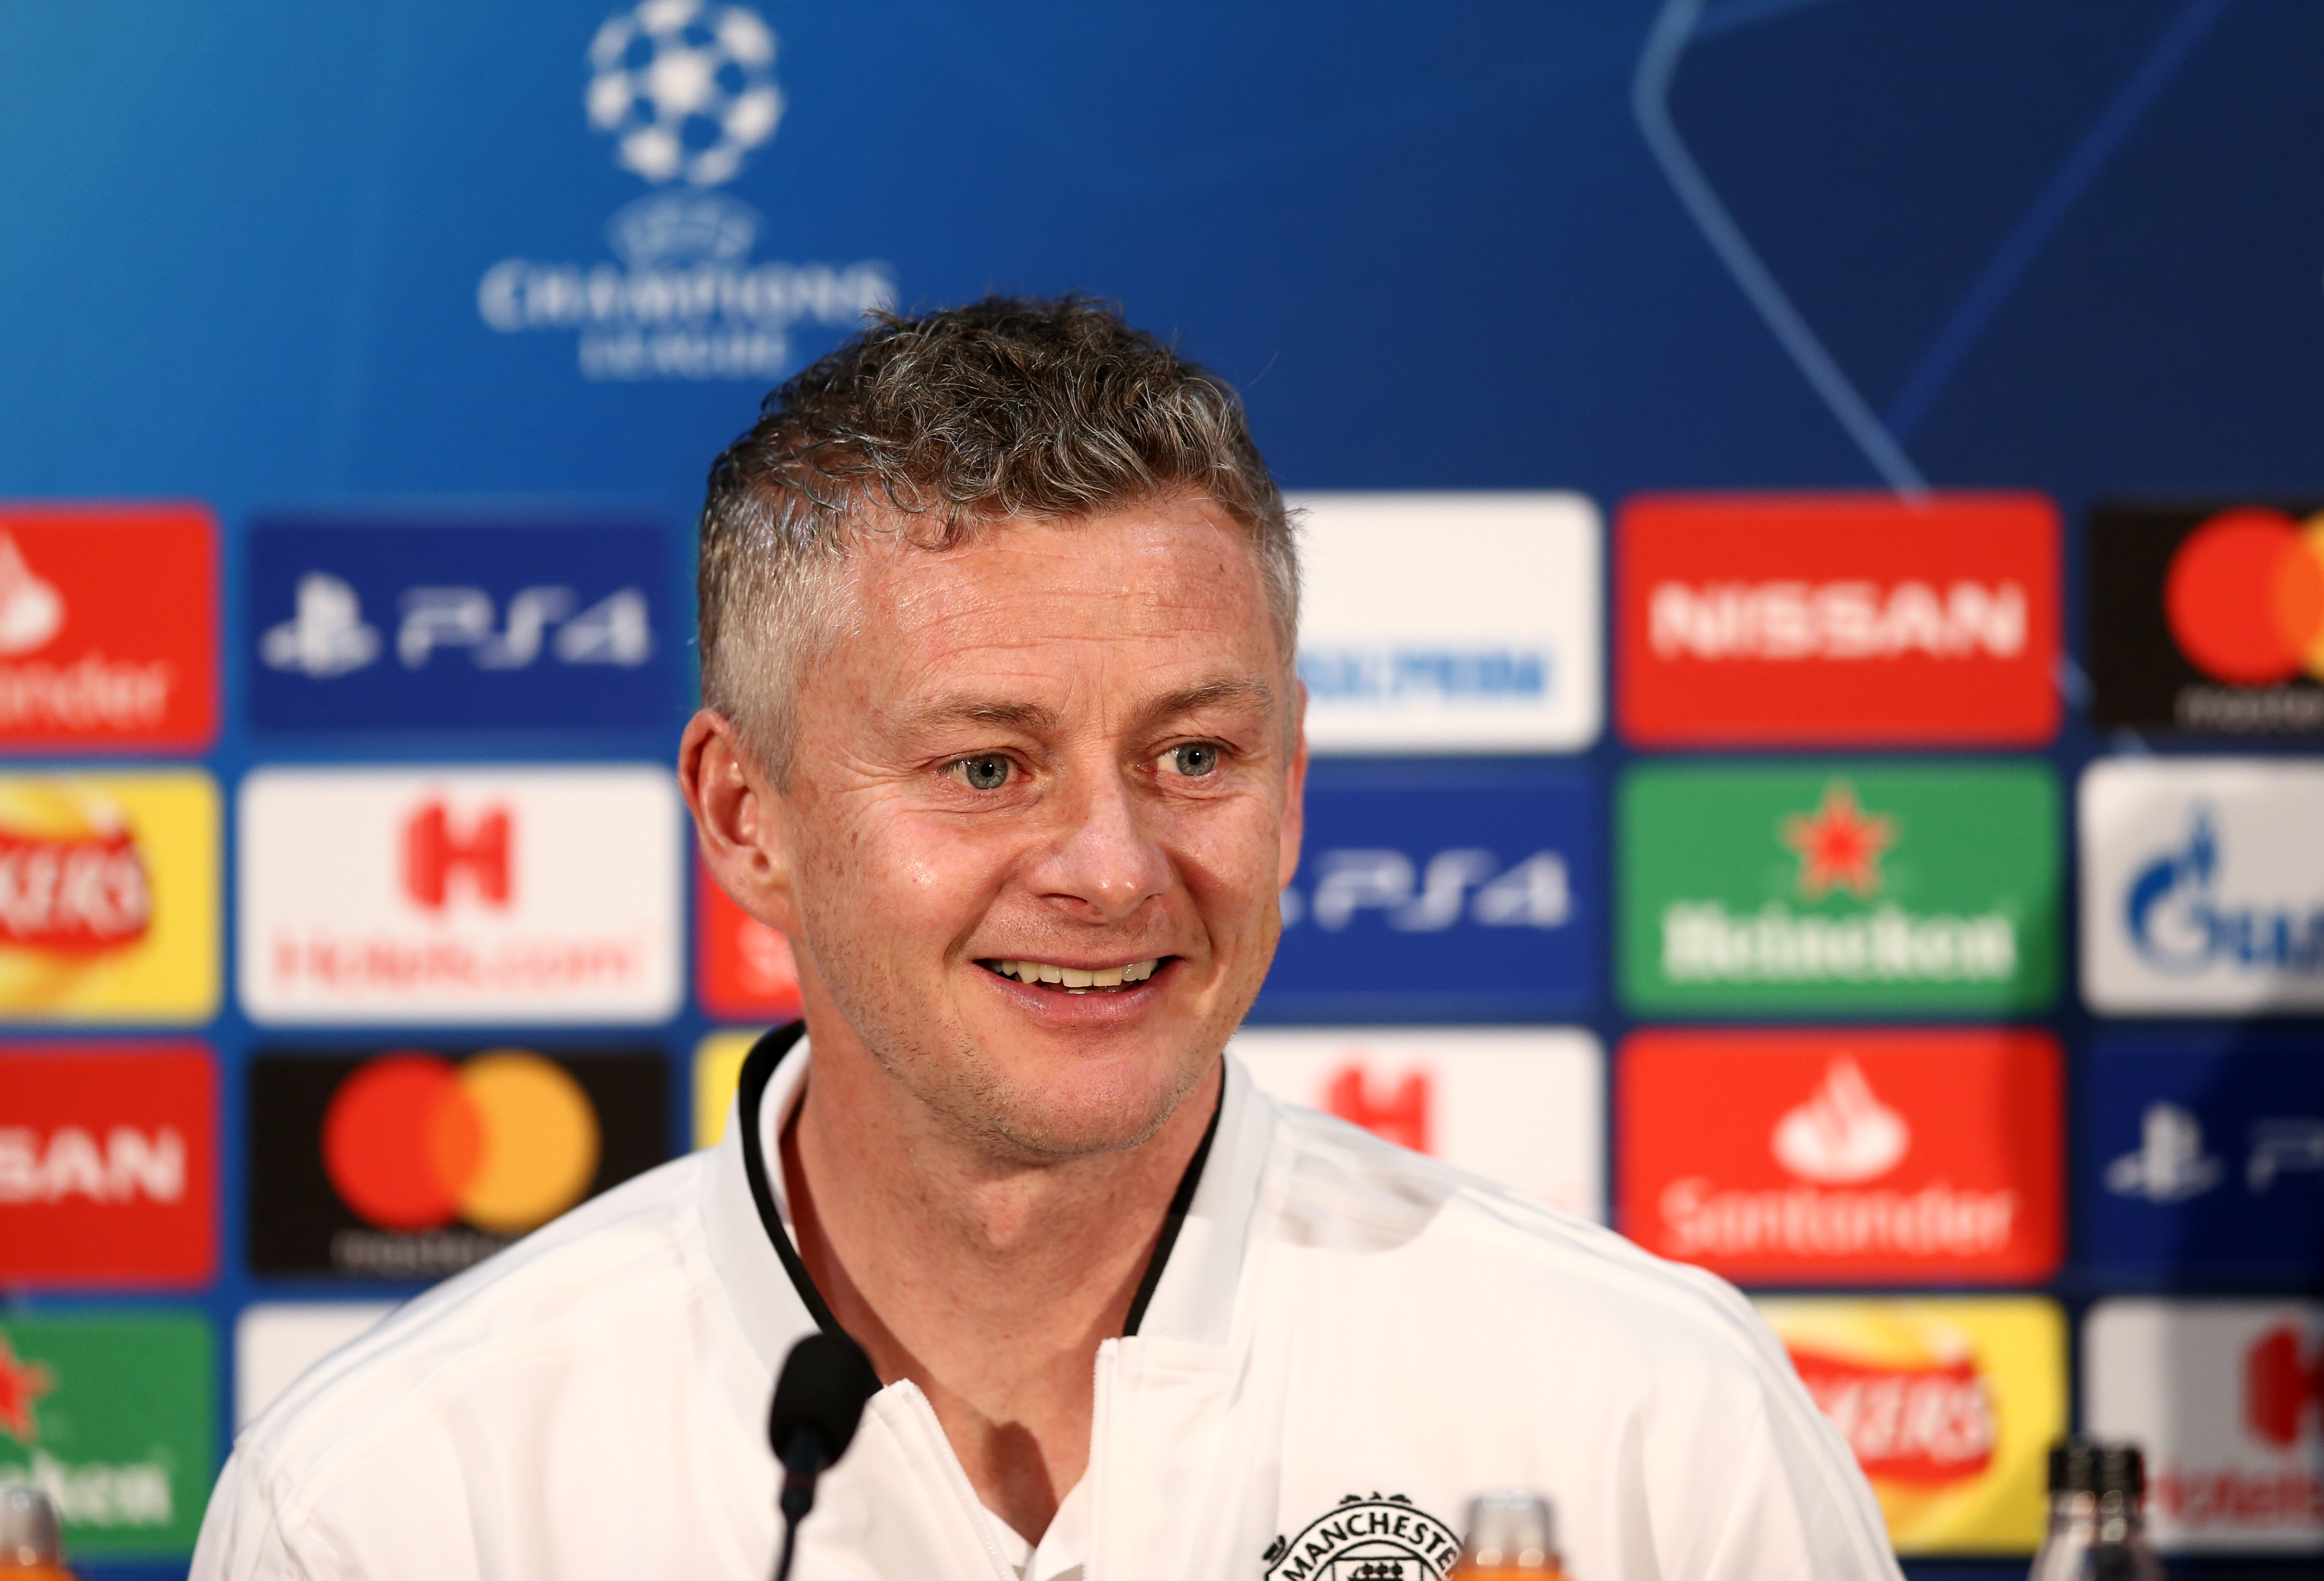 MANCHESTER, ENGLAND - FEBRUARY 11:  Ole Gunnar Solskjaer, Interim Manager of Manchester United reacts during a press conference ahead of their UEFA Champions League Round of 16 match against Paris Saint-Germain F.C. at Aon Training Complex on February 11, 2019 in Manchester, England.  (Photo by Jan Kruger/Getty Images)